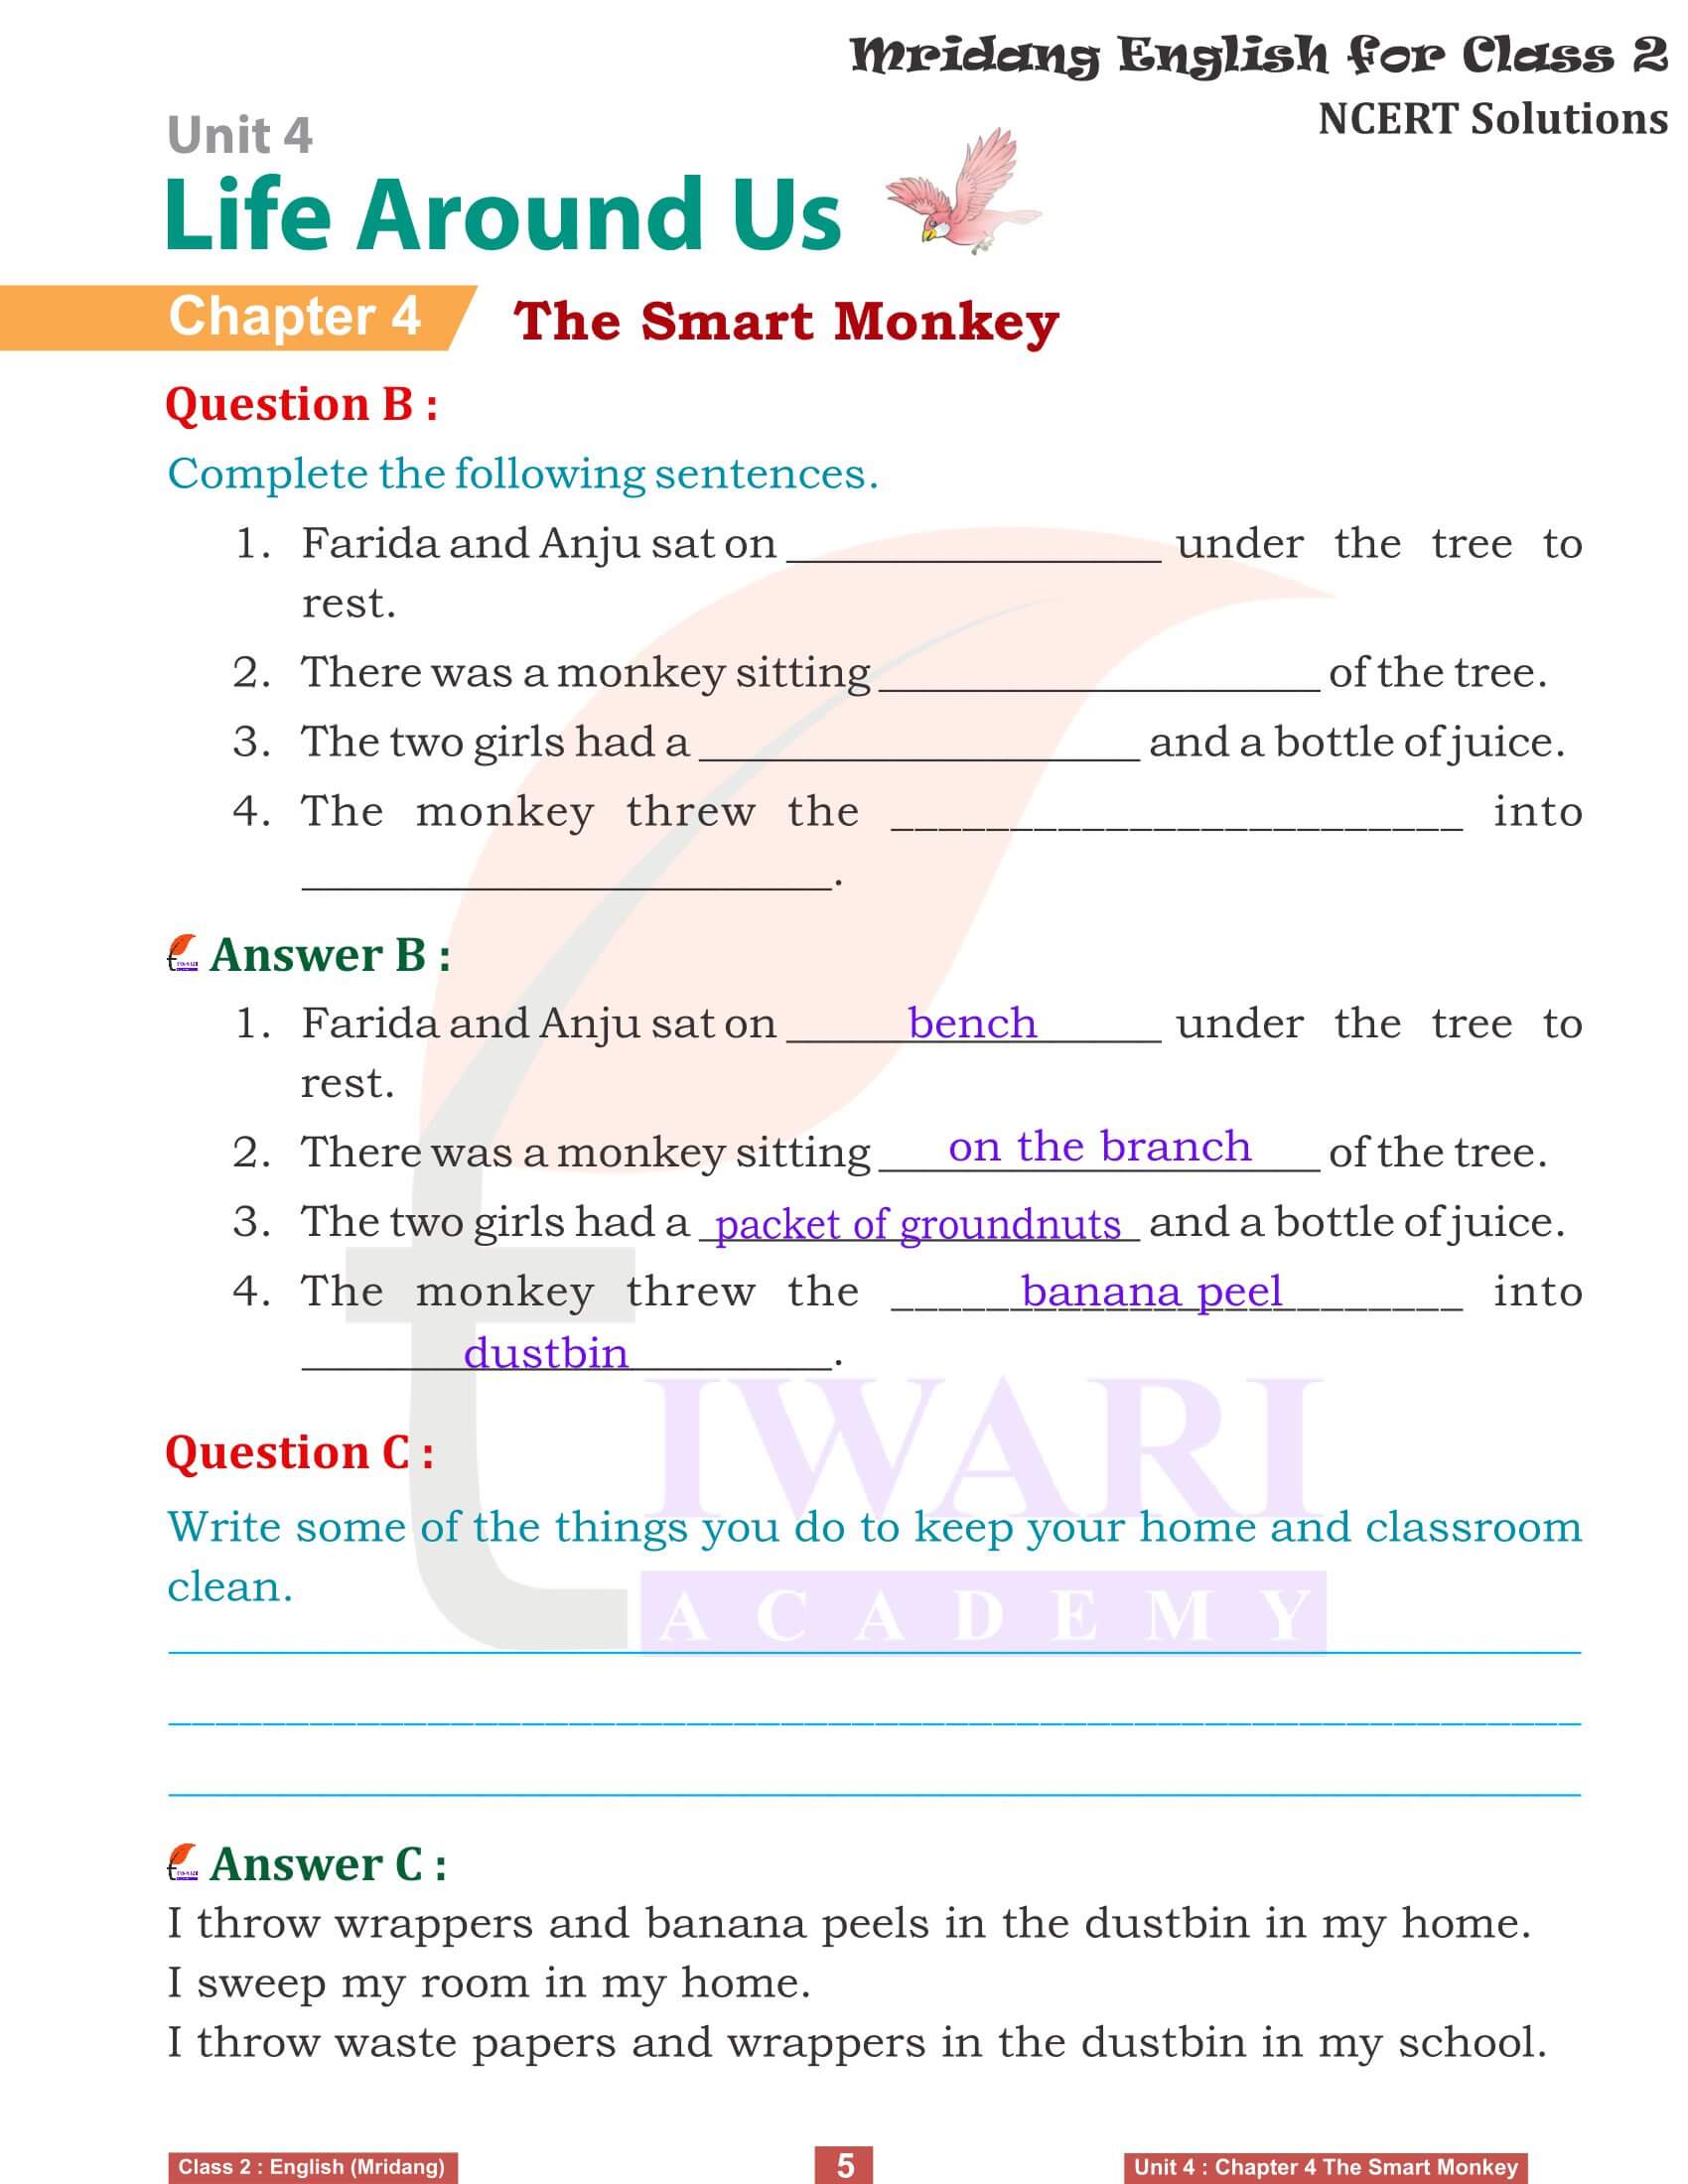 NCERT Solutions for Class 2 English Mridang Unit 4 Life Around Us Chapter 4 Answers